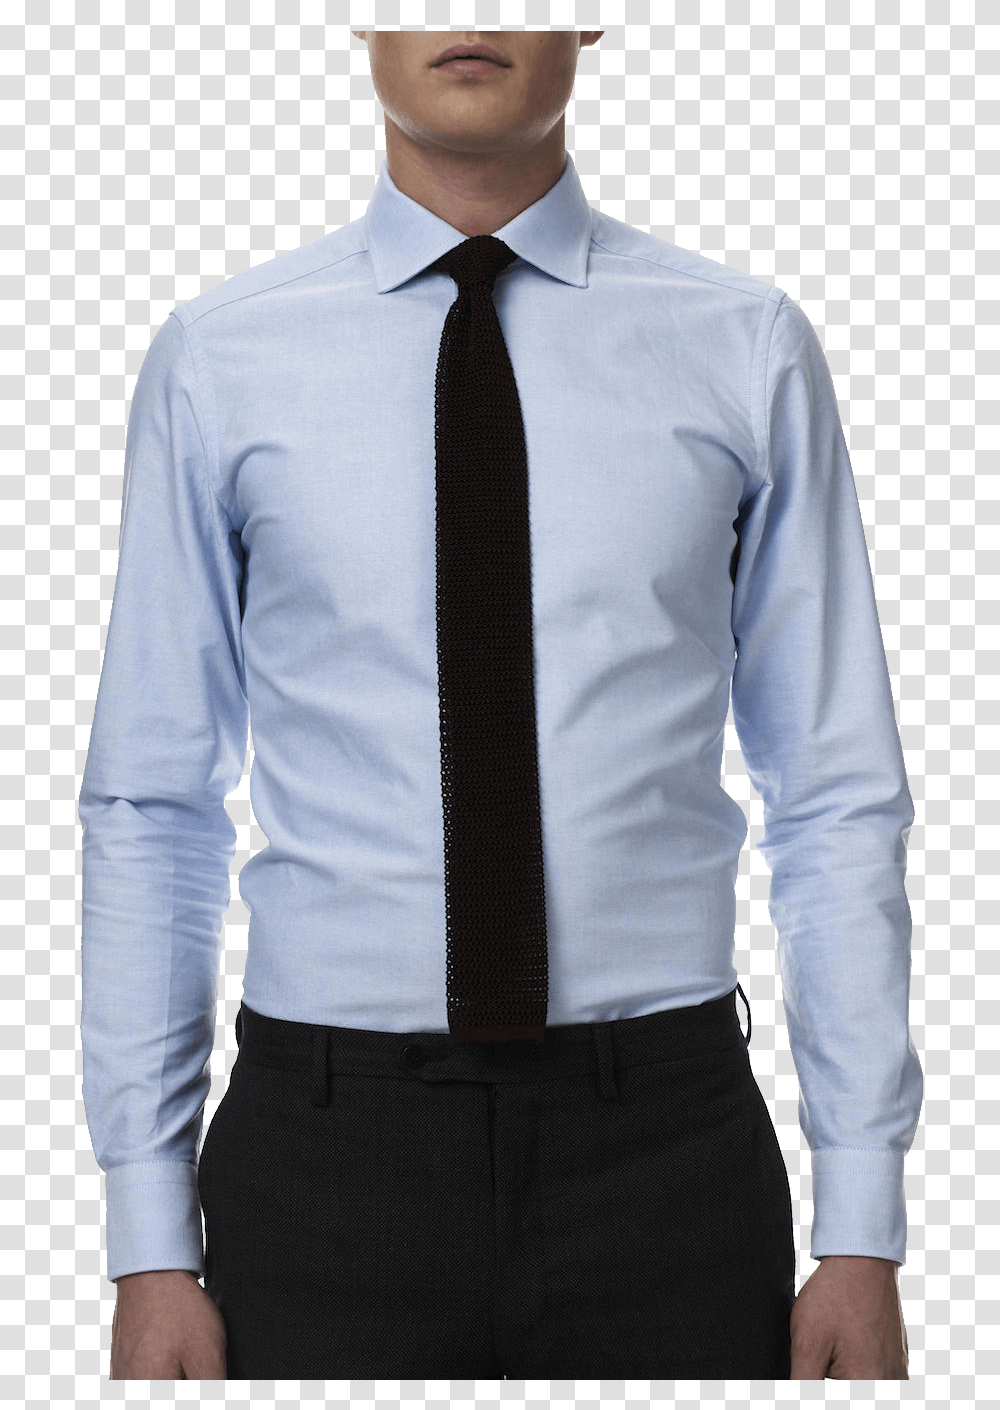 Download Llight Blue Dress Shirt Black Tie Image For Free Blue Shirt Black Tie, Accessories, Accessory, Clothing, Apparel Transparent Png